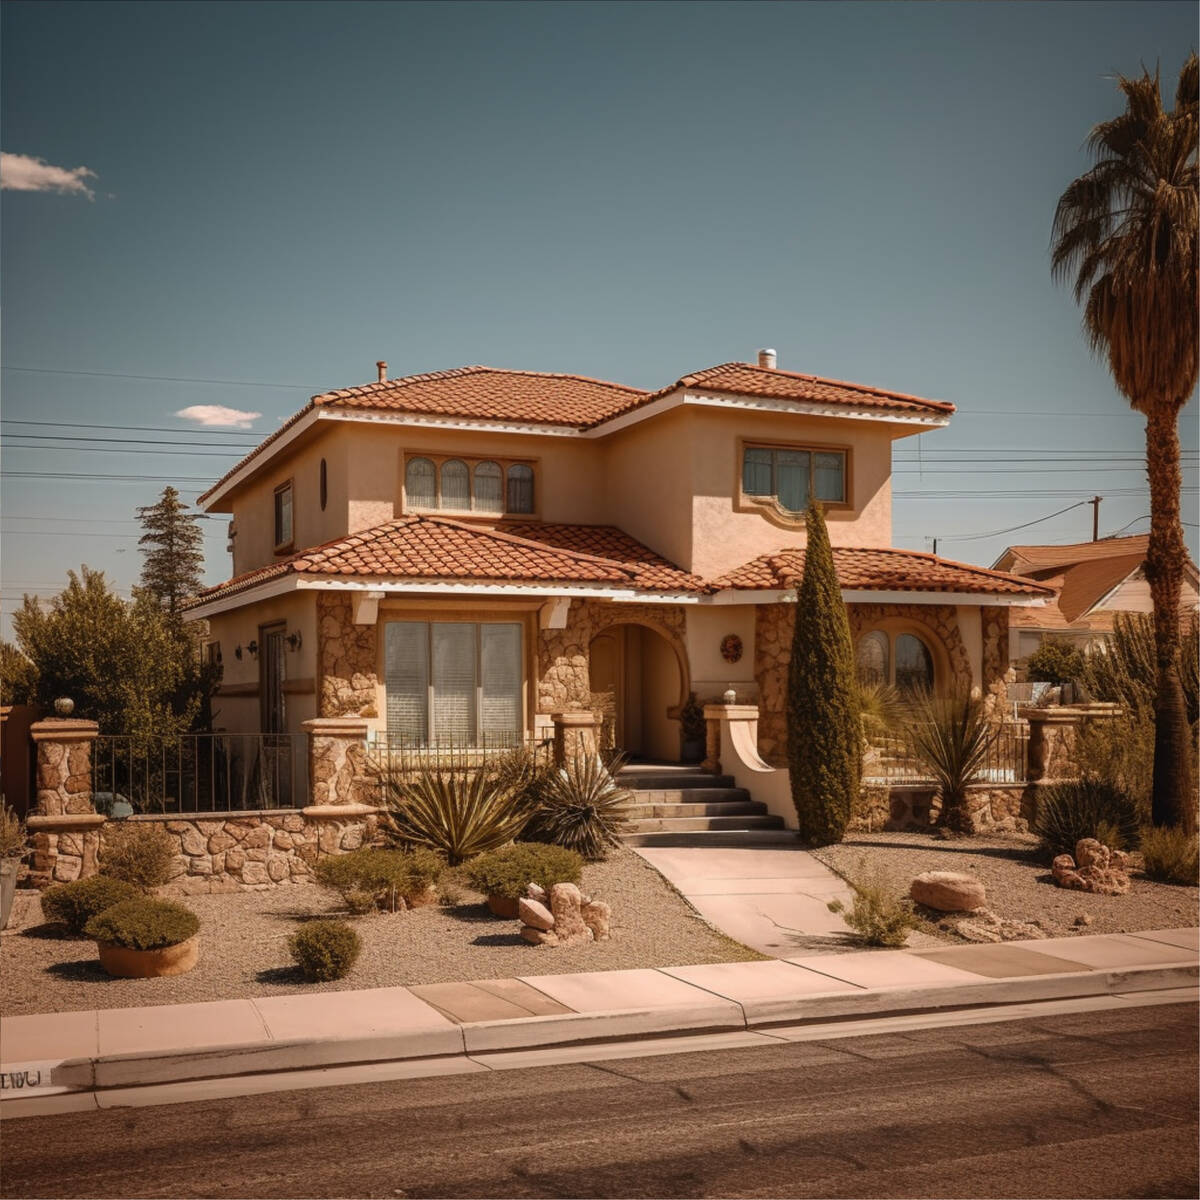 This is what AI thinks a typical home in Nevada looks like: (Midjourney)